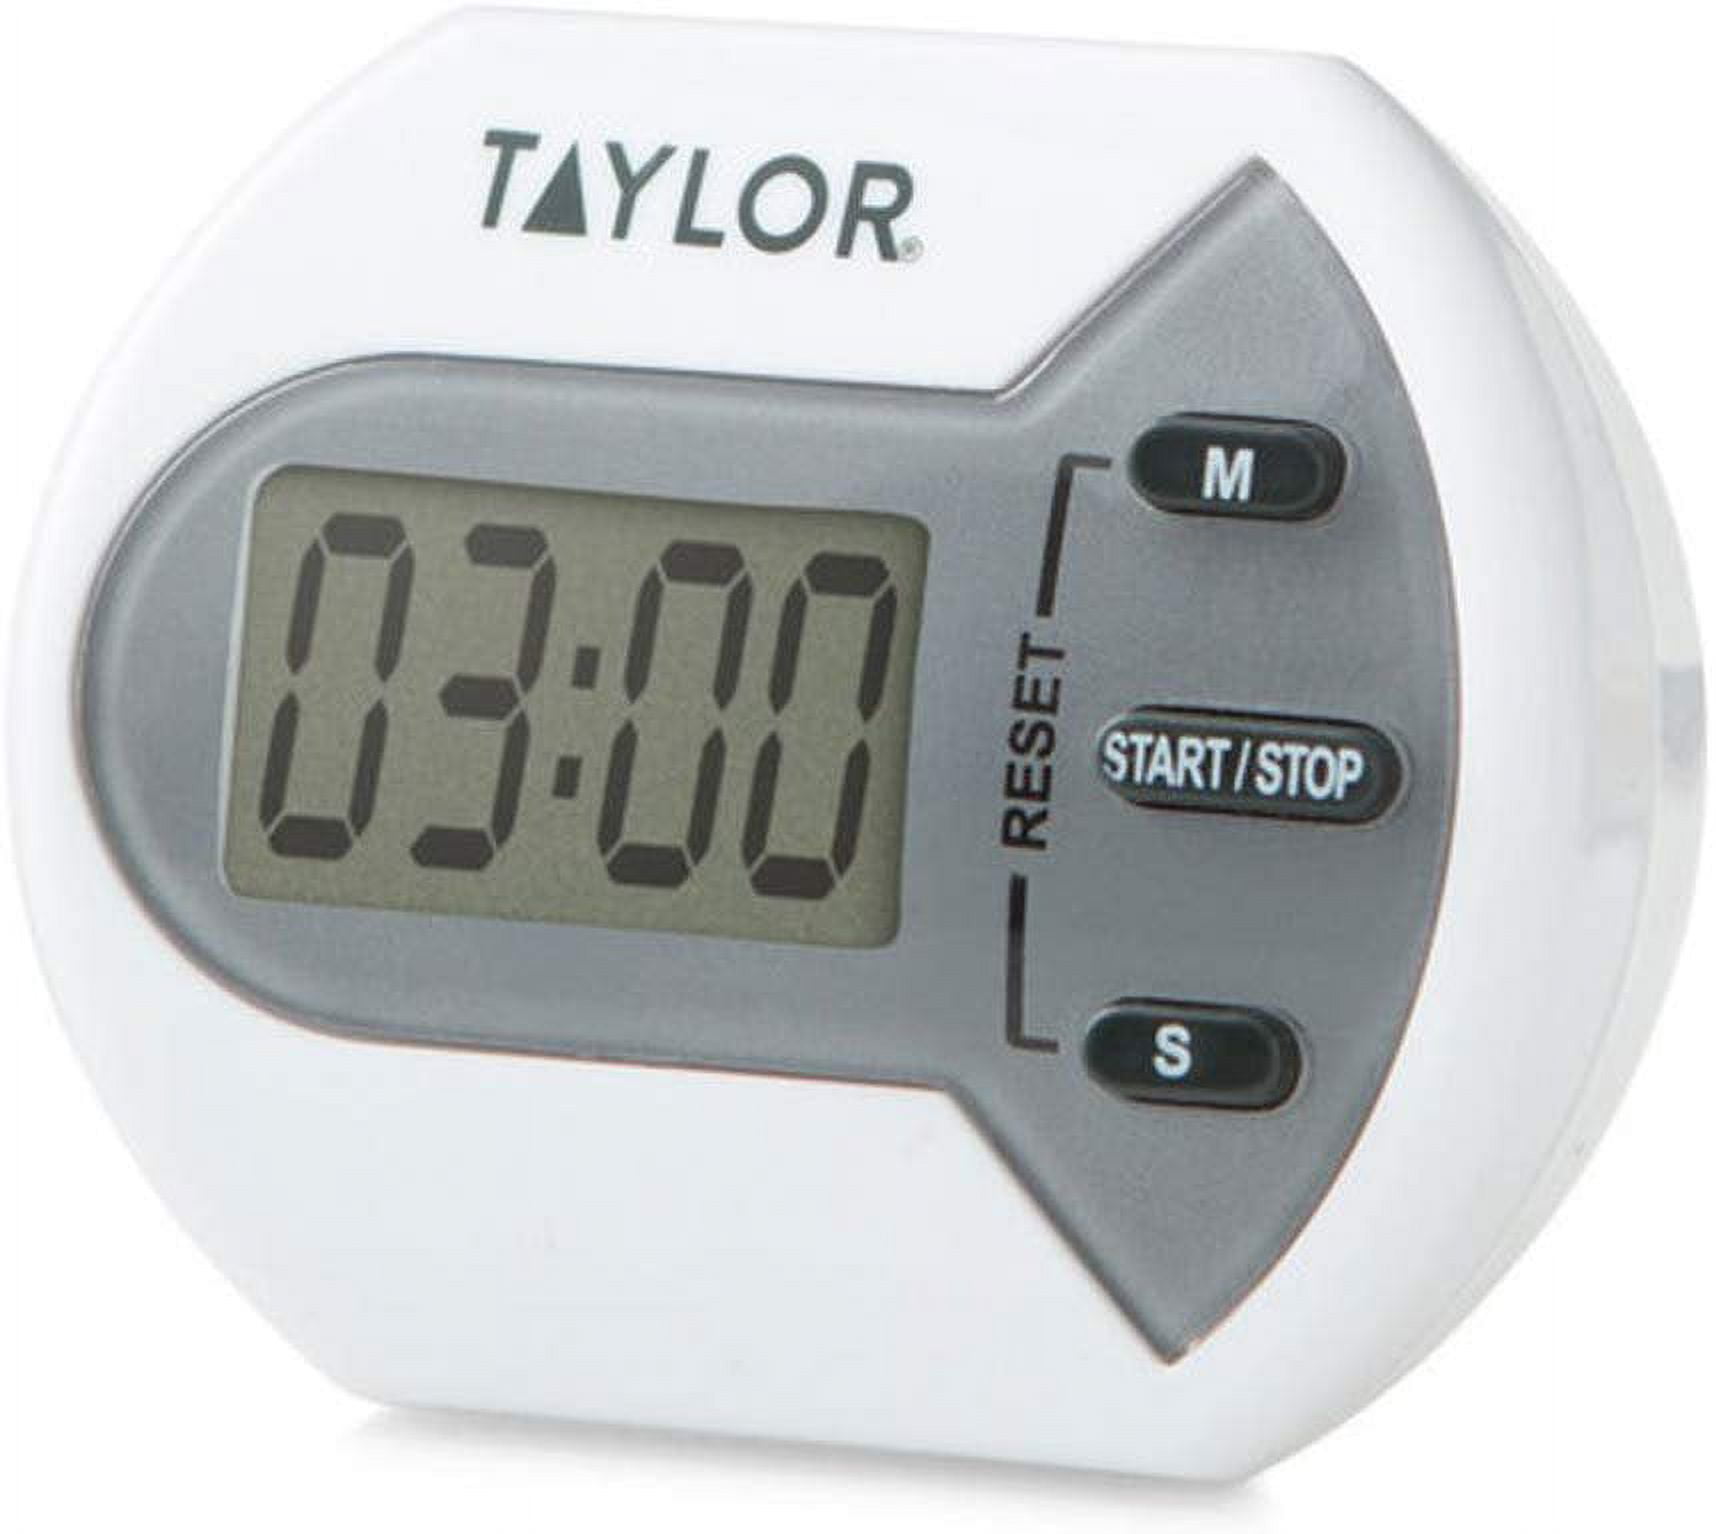 Taylor Precision 5806 Clip or Magnetic Minute / Second Digital